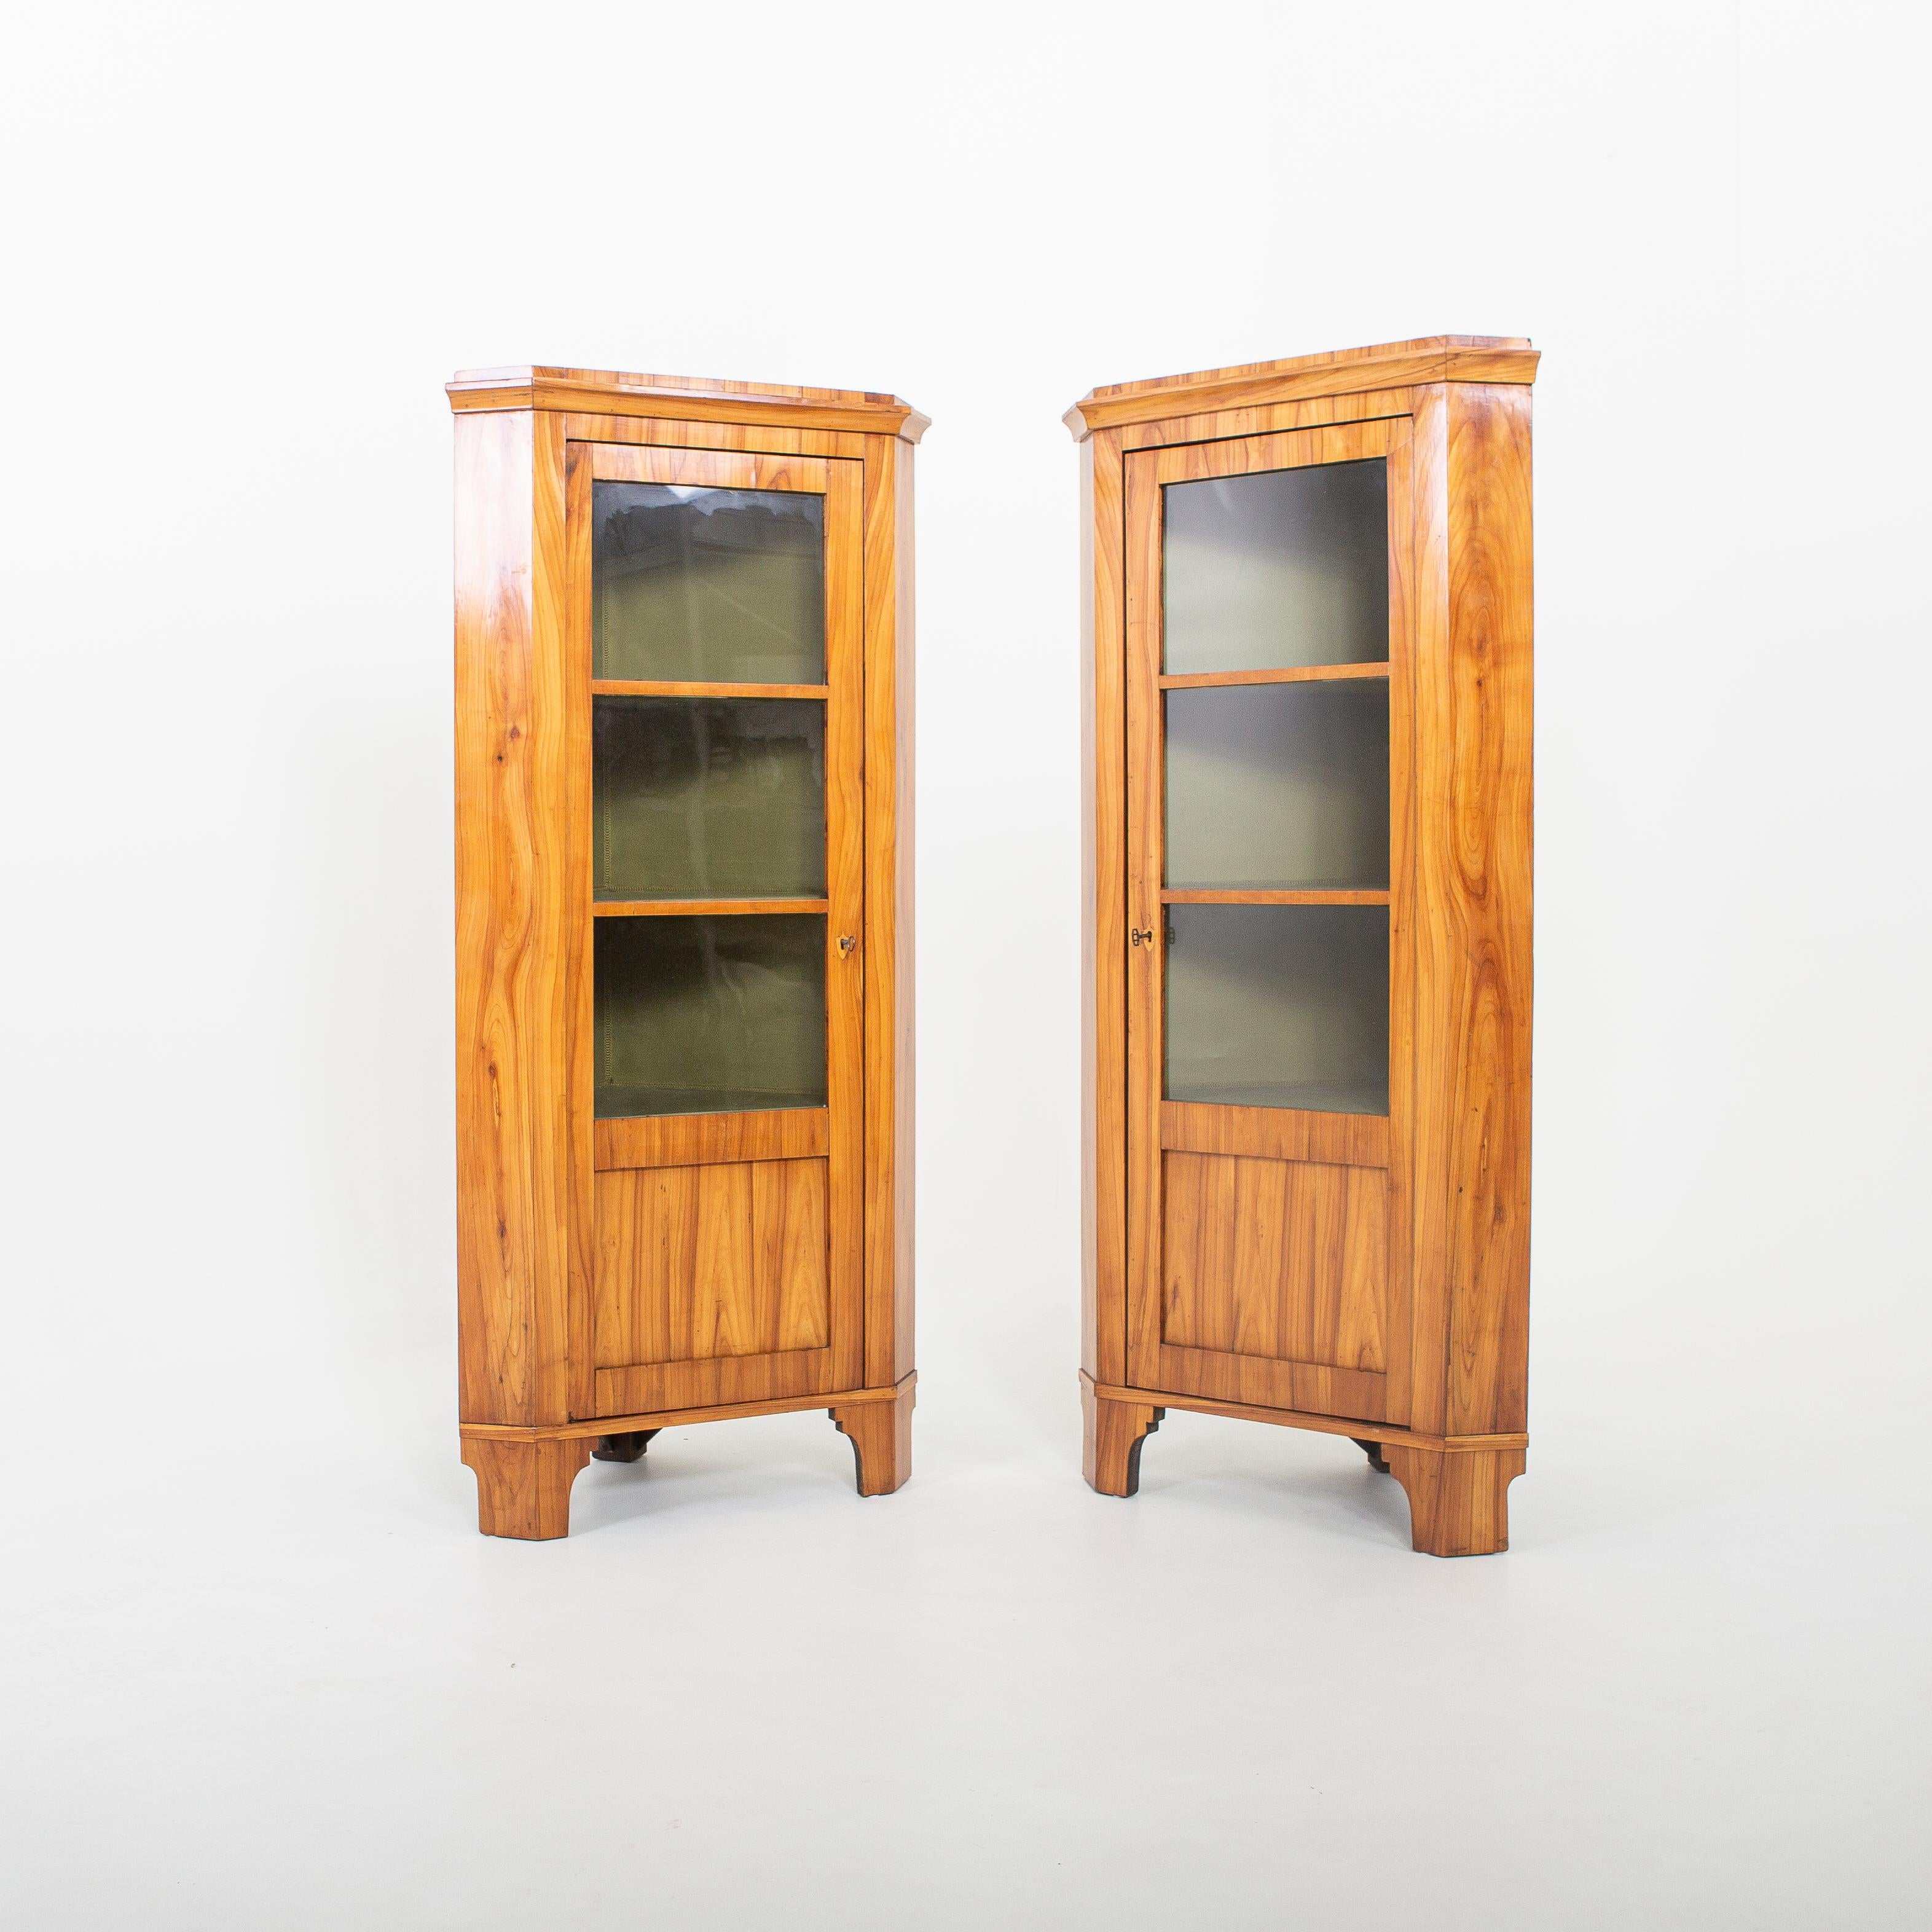 Pair of Biedermeier corner cupboards on bracket feet and a door with three-quarter glazing. Cherry veneered, inside lined with green fabric. Restored condition.